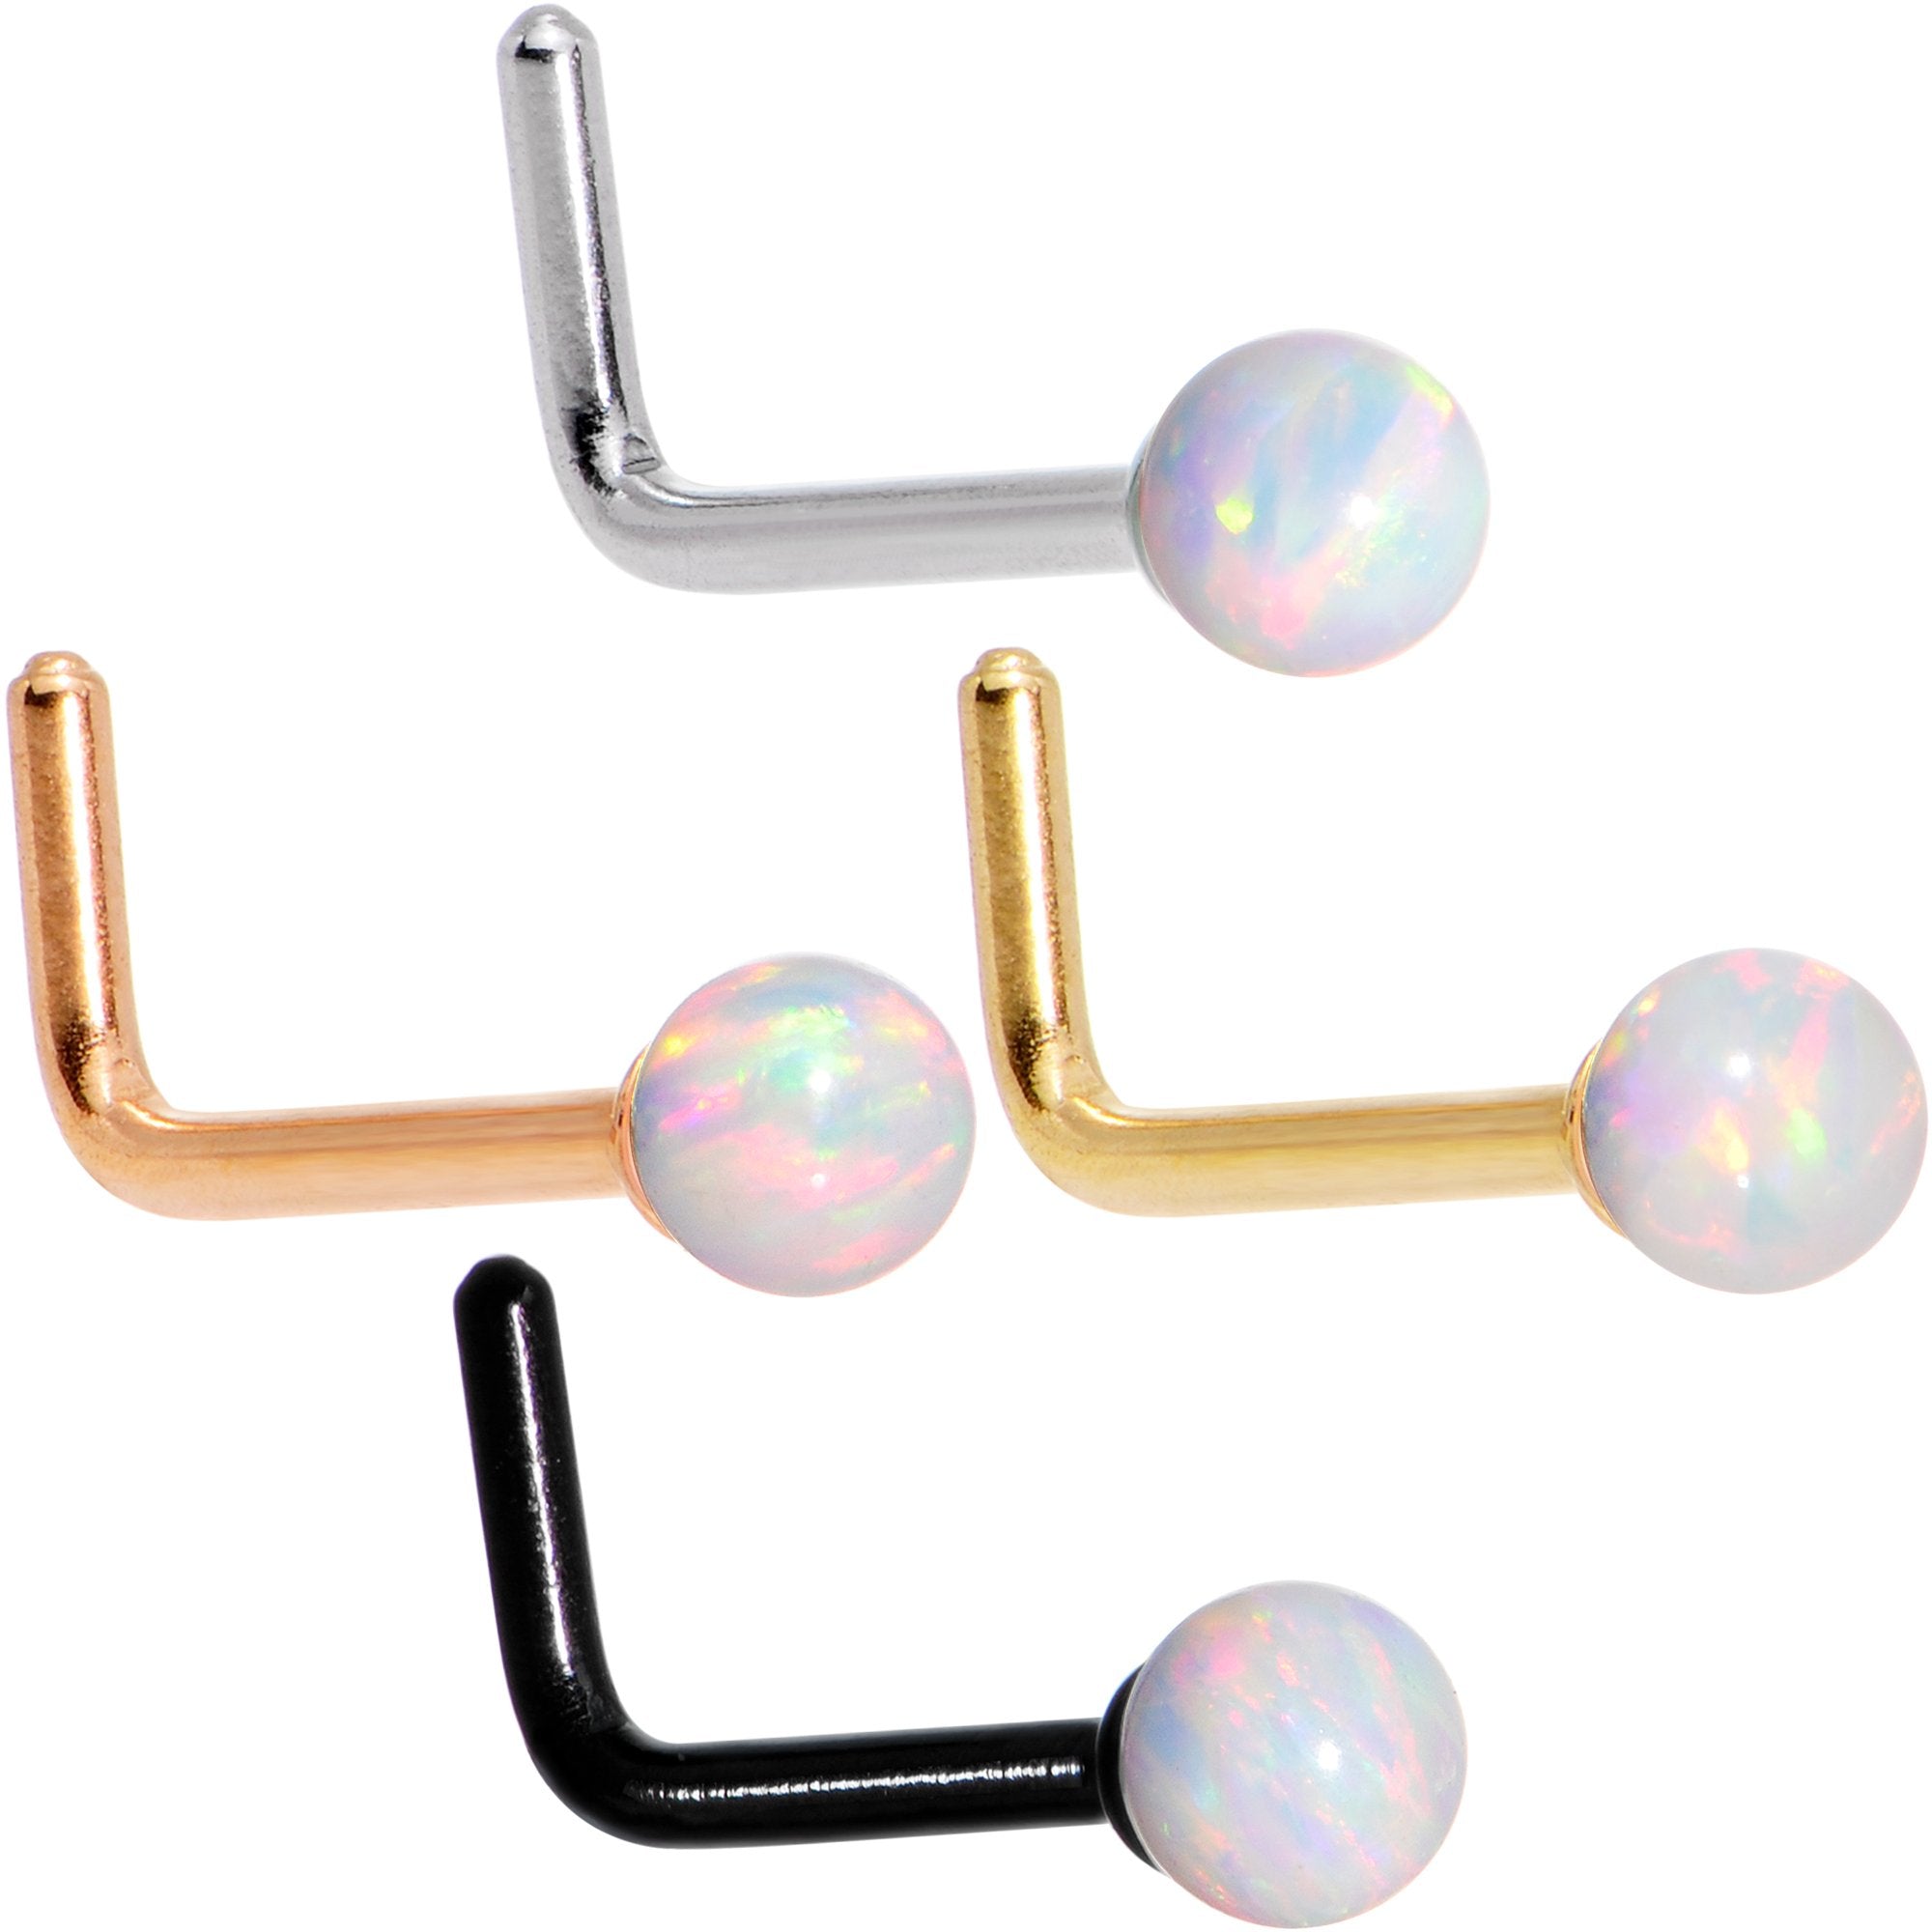 White 2.5mm Synthetic Opal Ball Anodized L Shaped Nose Ring 4 Pack Set